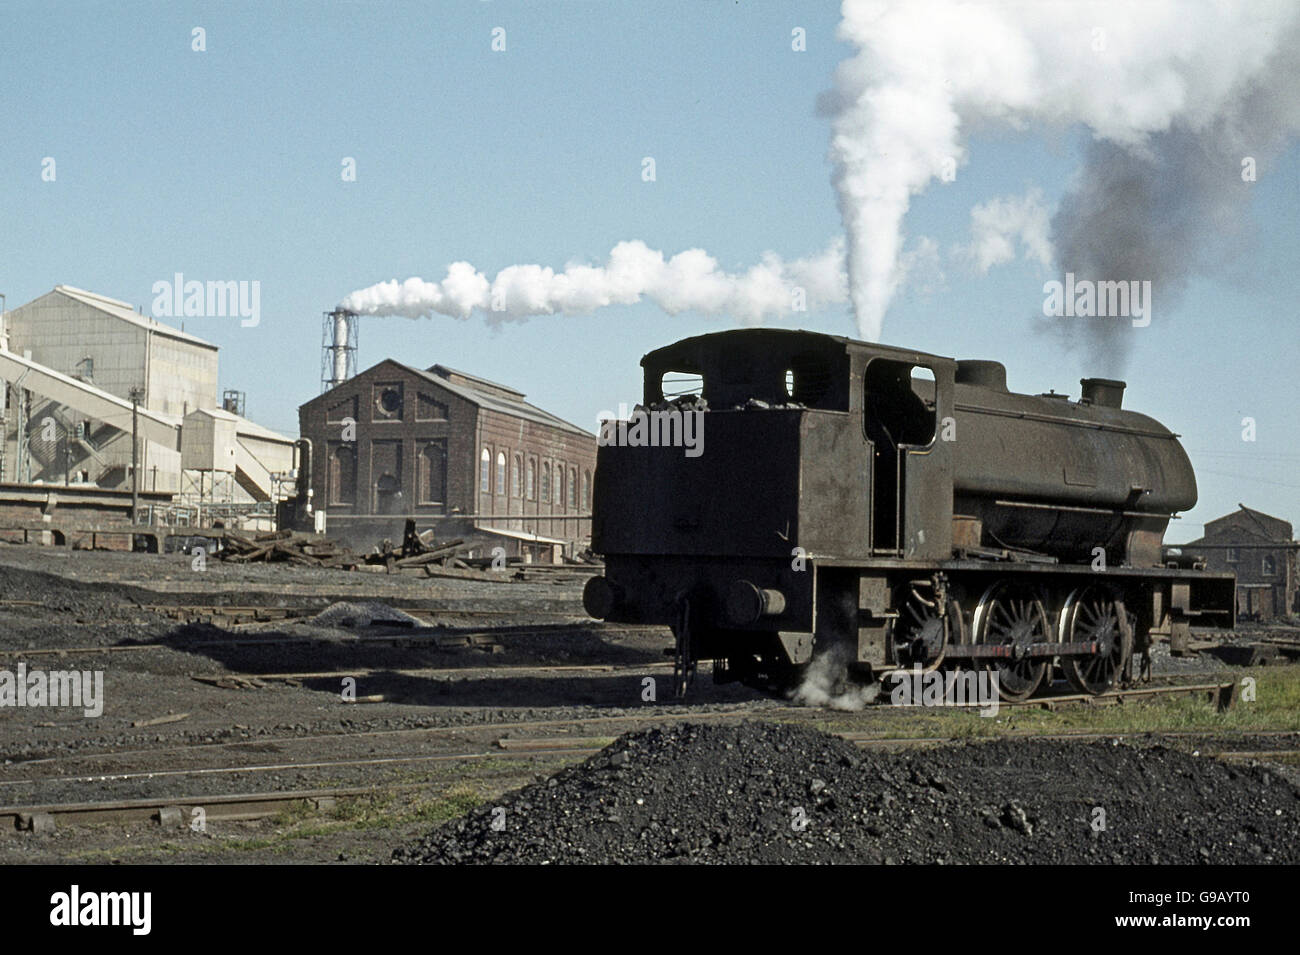 Hunslet Austerities with Giesl chimneys at work on the Cumberland coalfield. Stock Photo